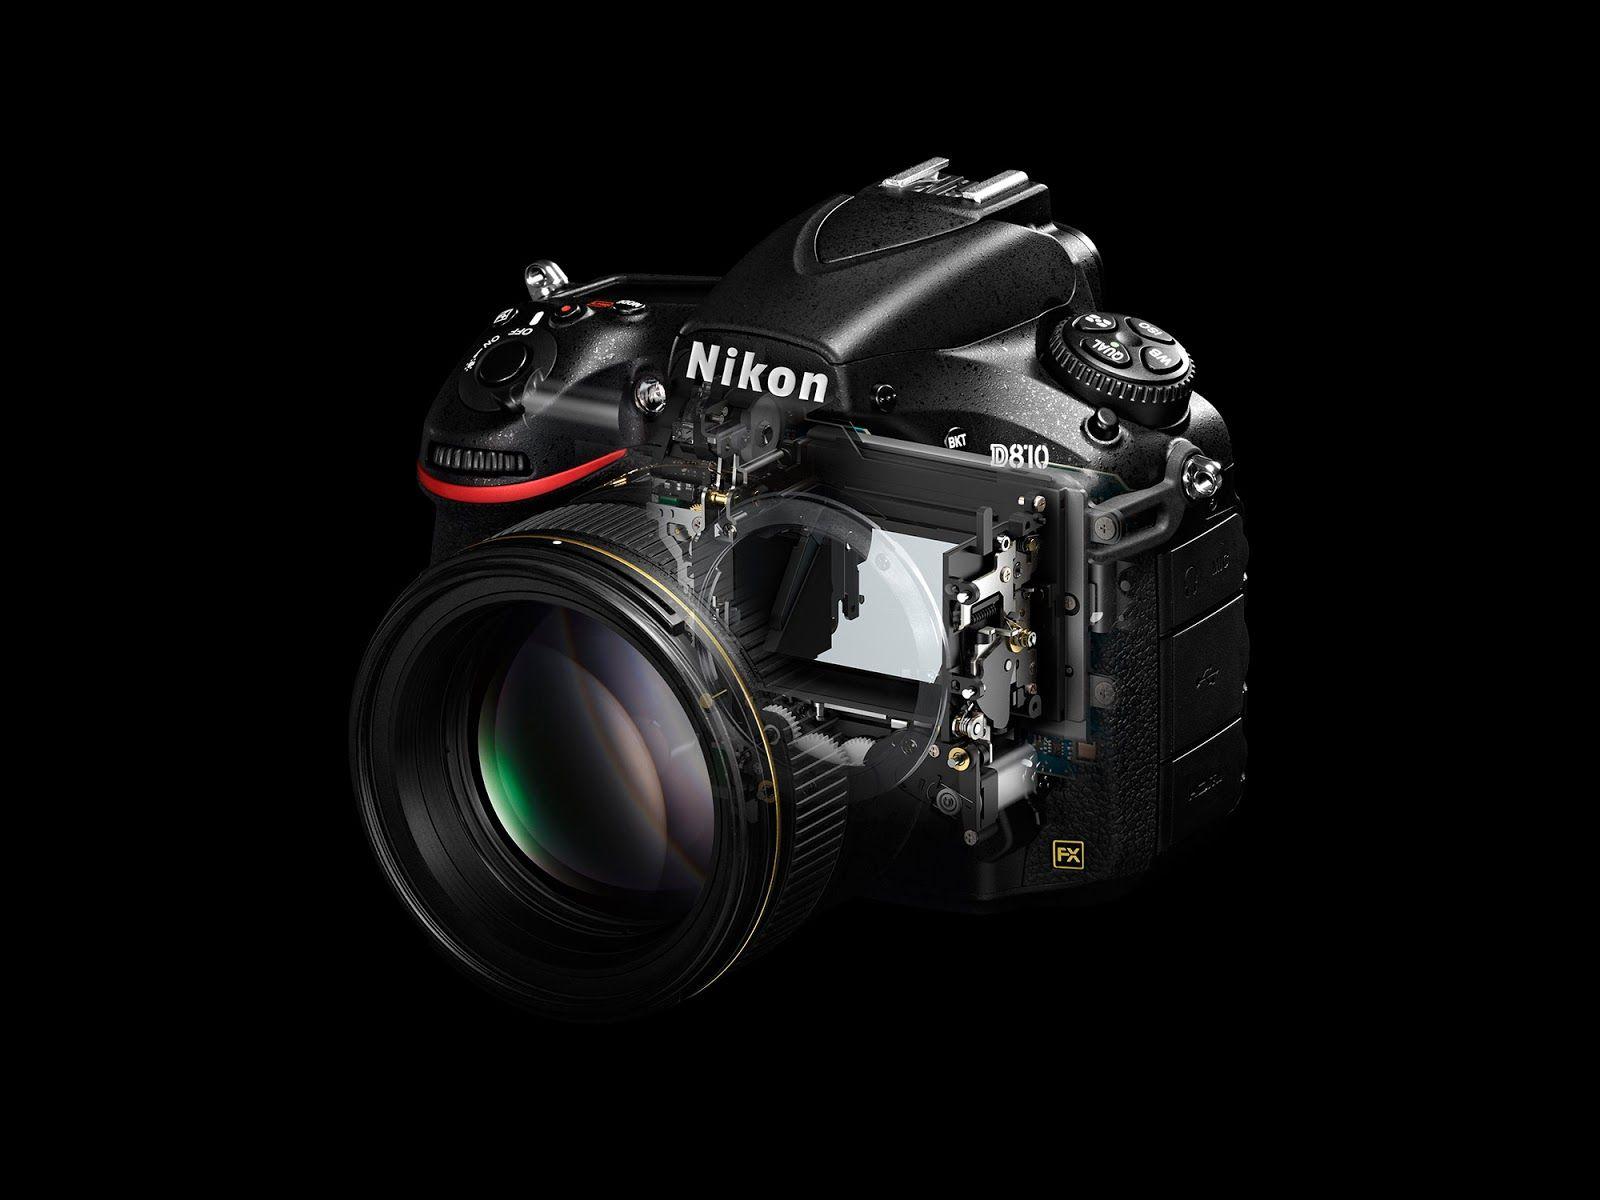 MasHD, Nikon's D810 replacement to be announced on the 25th of July